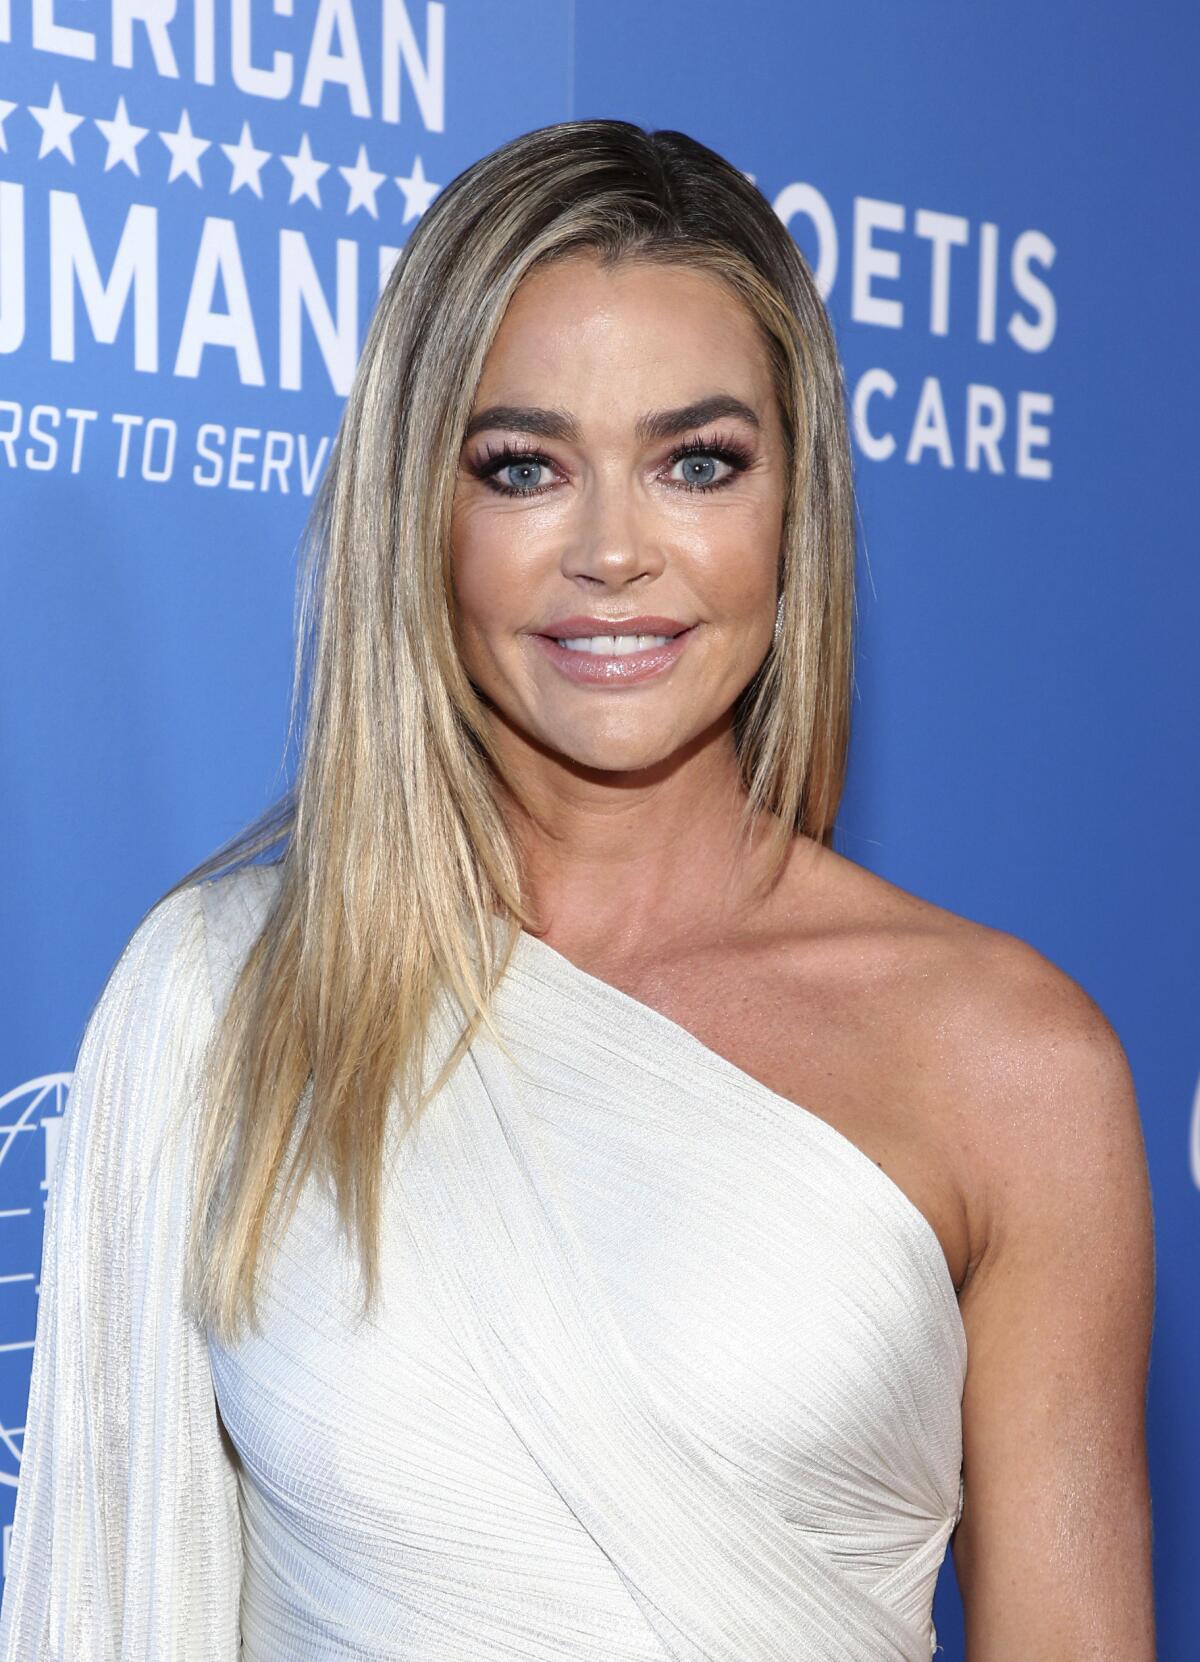 Denise Richards poses in a white dress at an event. 